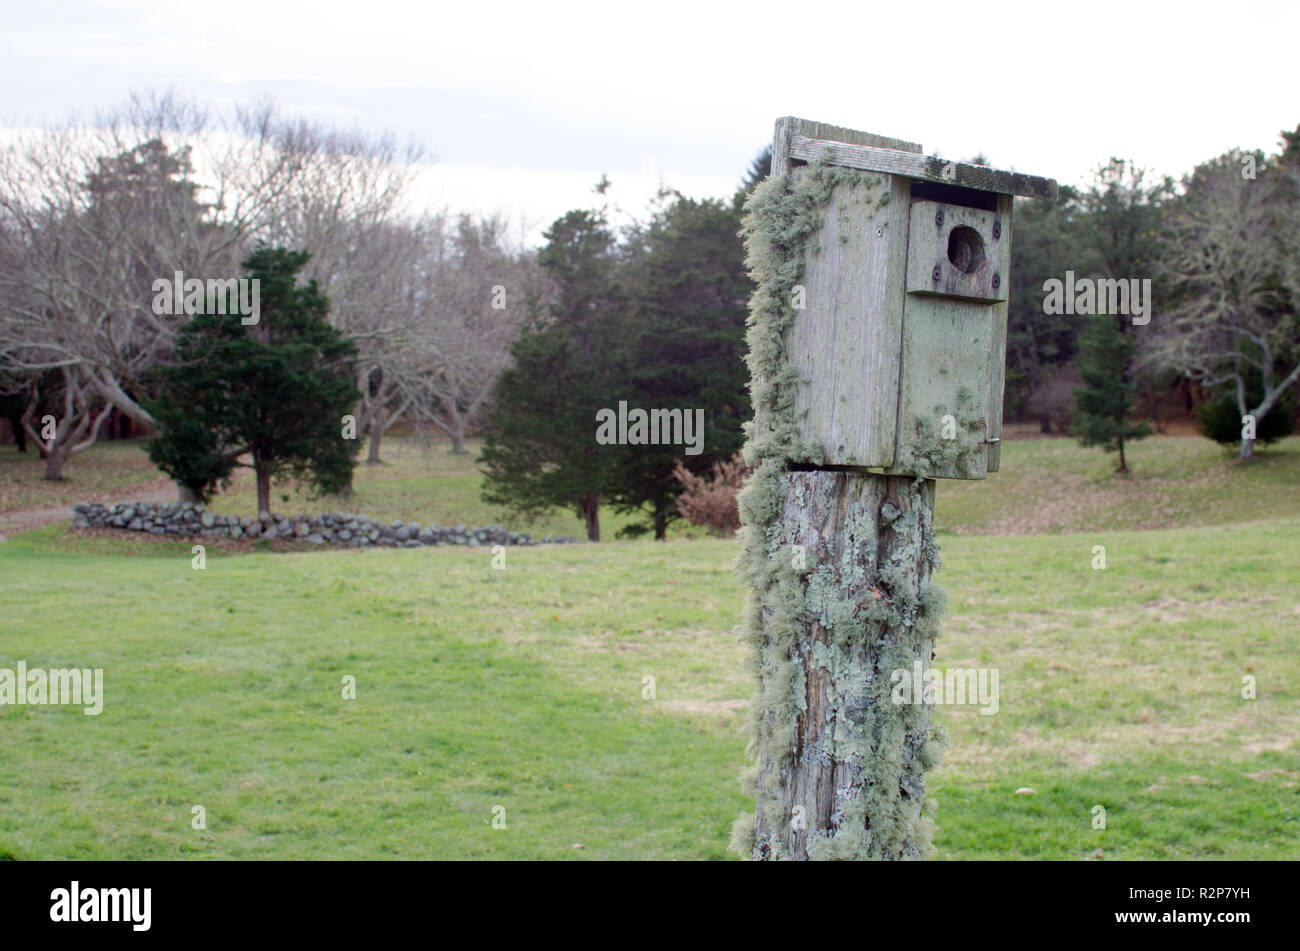 Old wooden birdhouse on wood post with mossy growth on overcast day at Bourne Farm, Falmouth, Cape Cod, Massachusetts USA Stock Photo